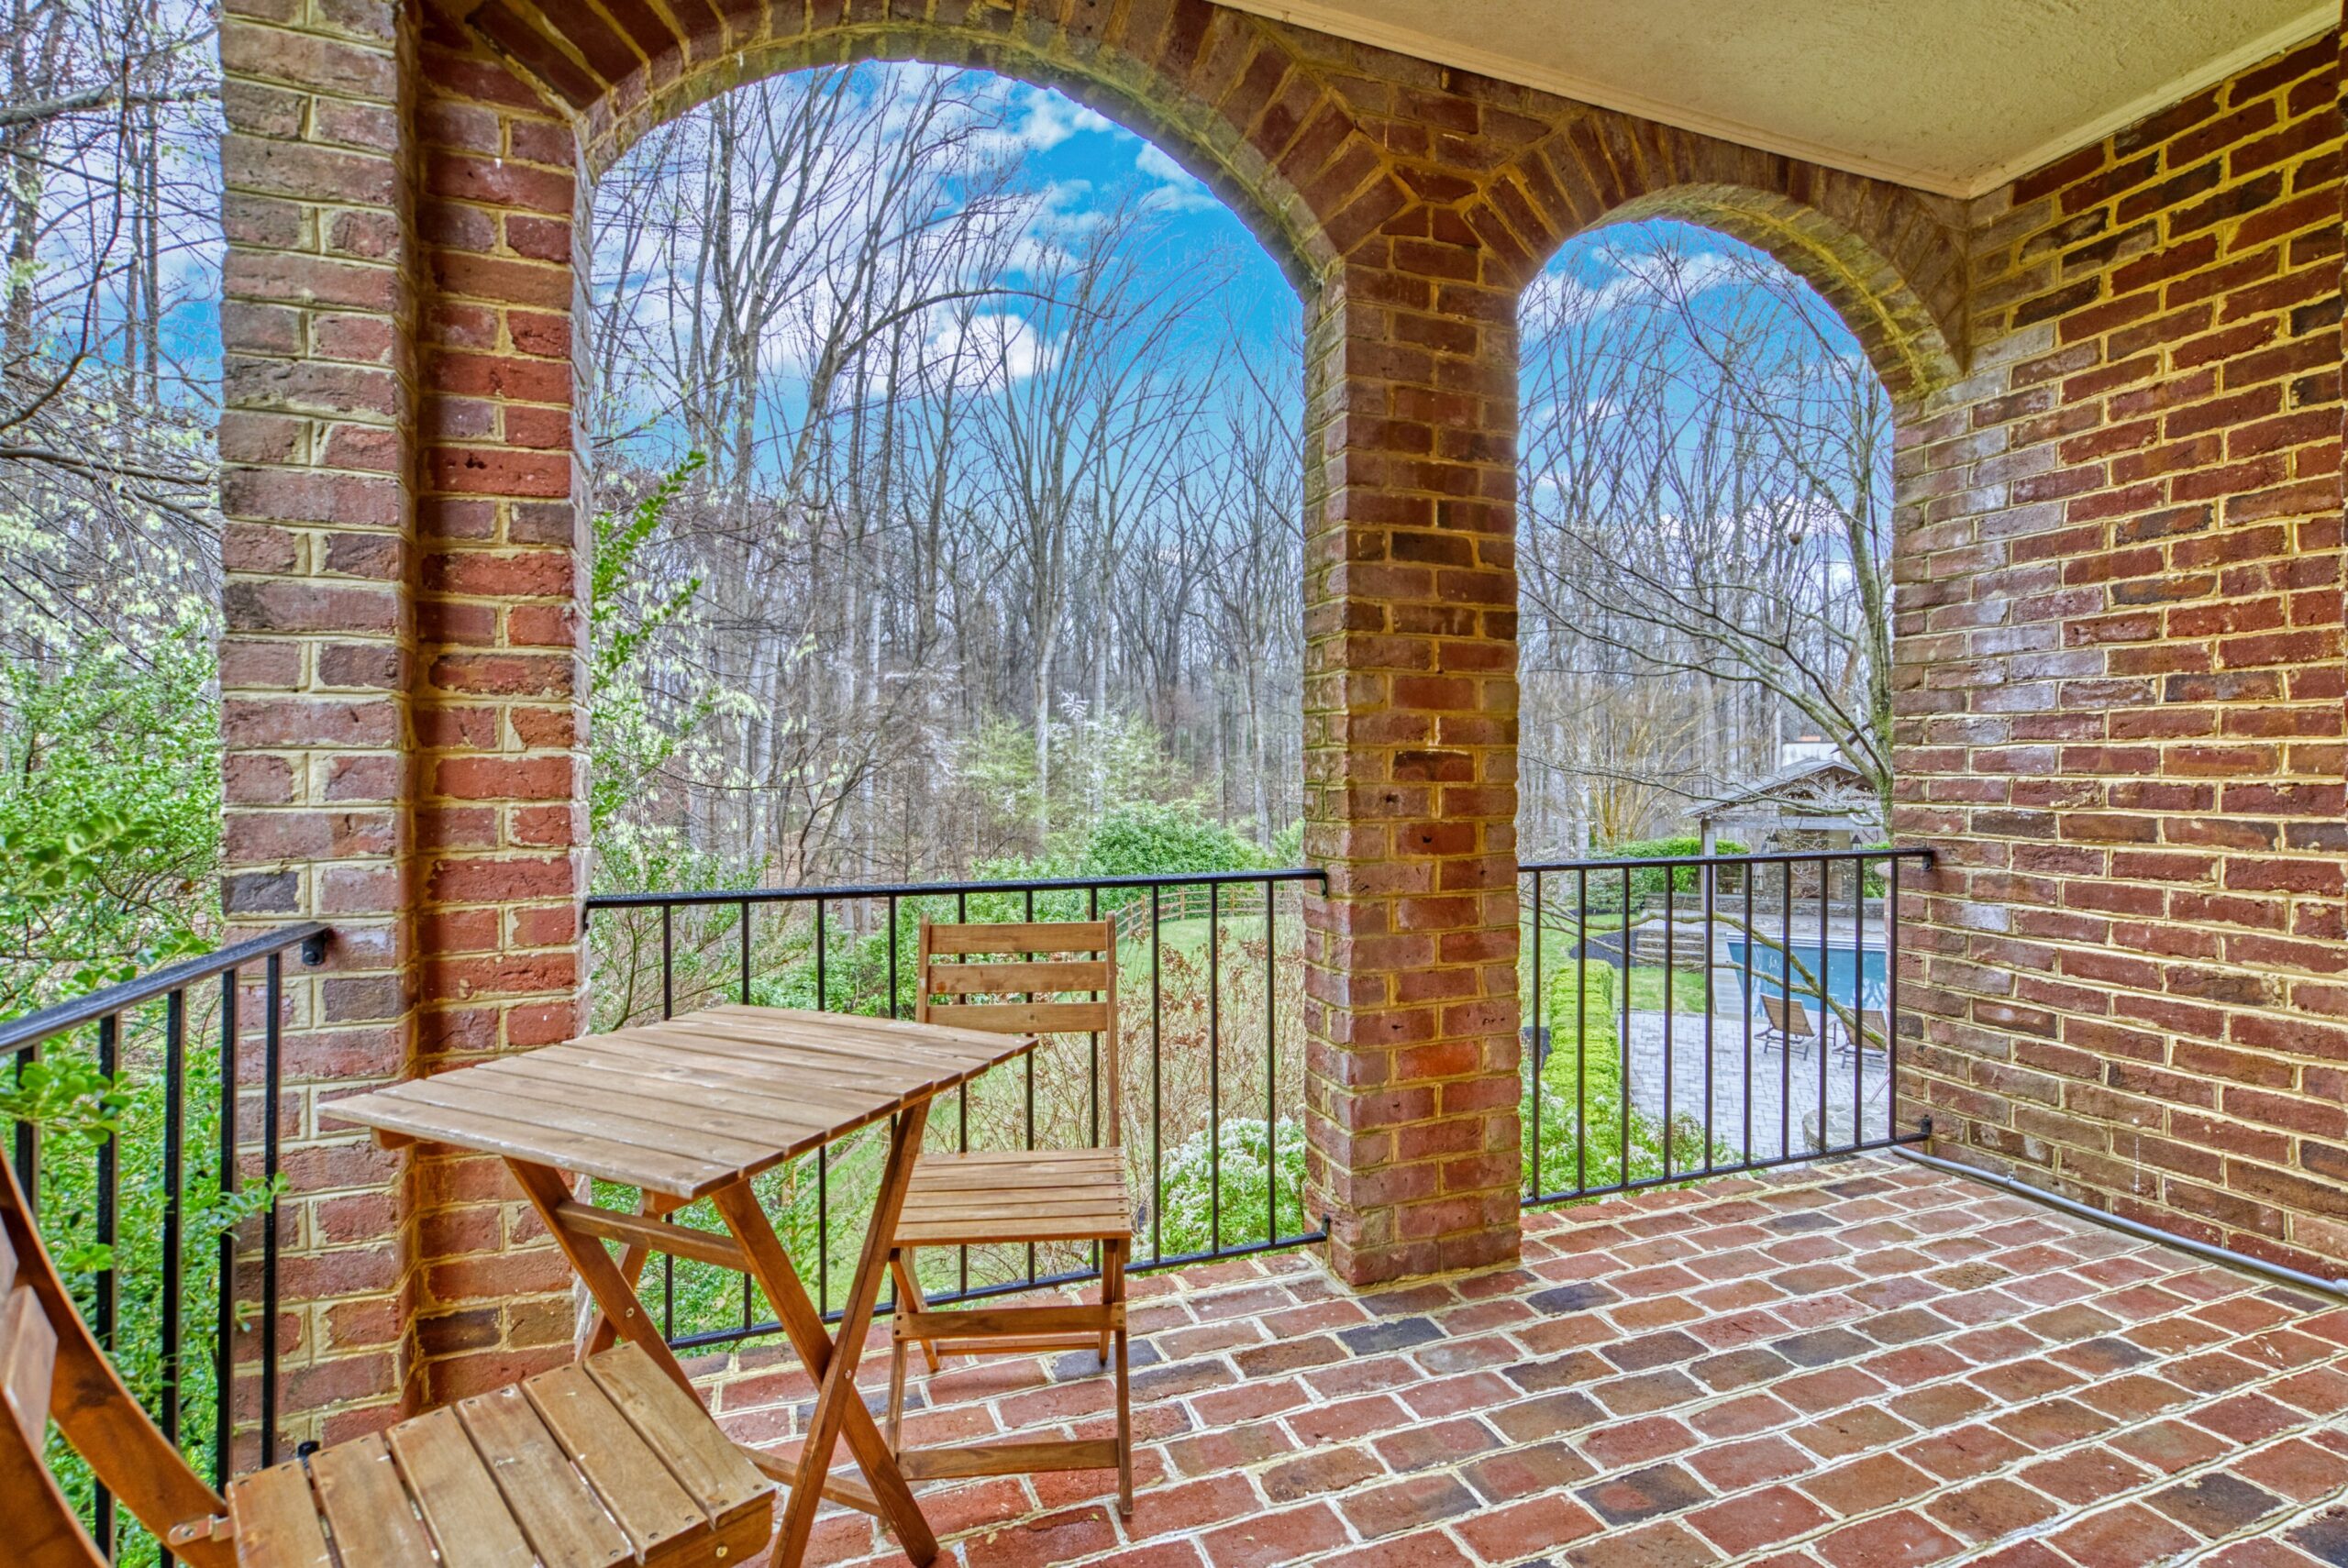 Professional exterior photo of 718 Potomac Knolls Dr - showing the inside of one of the brick terraces, glimpsing the pool in the background